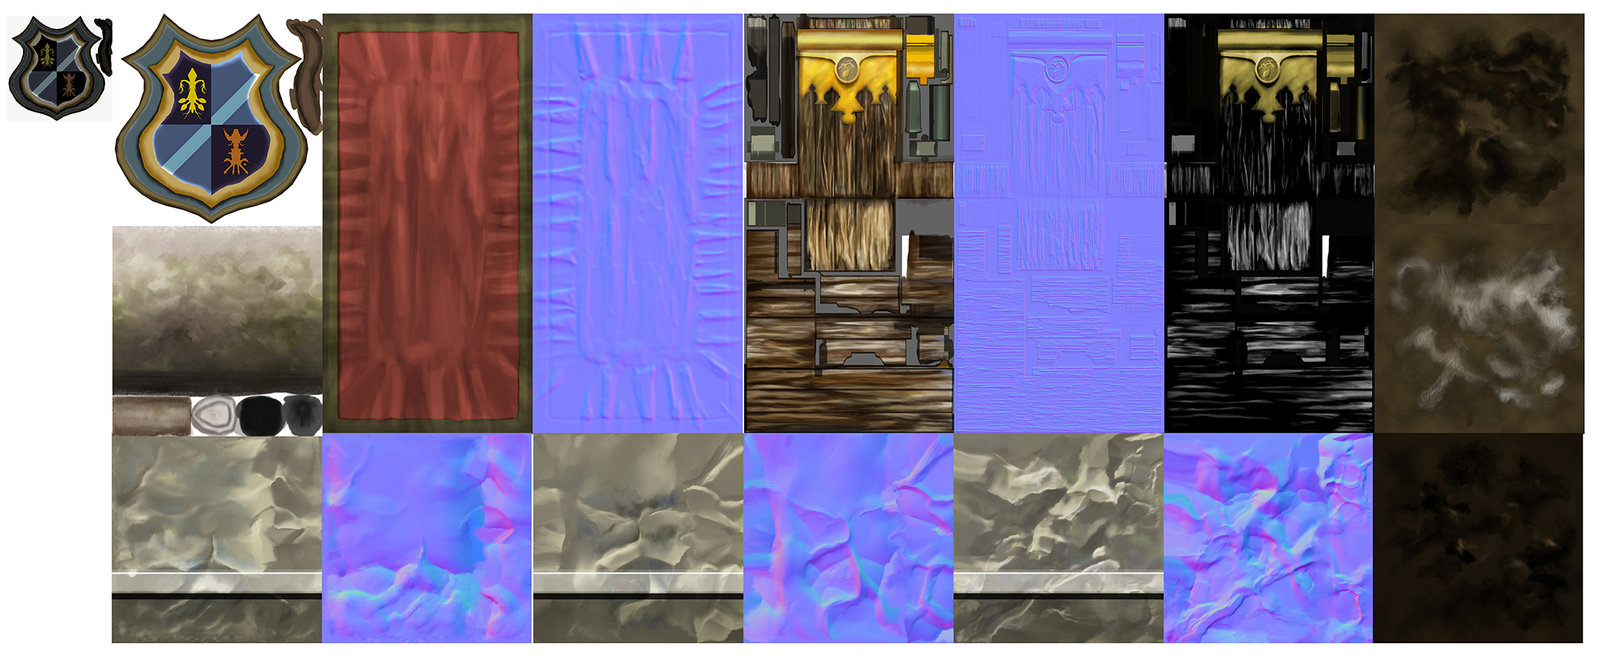 Texture samples. Primarily hand painted in Photoshop